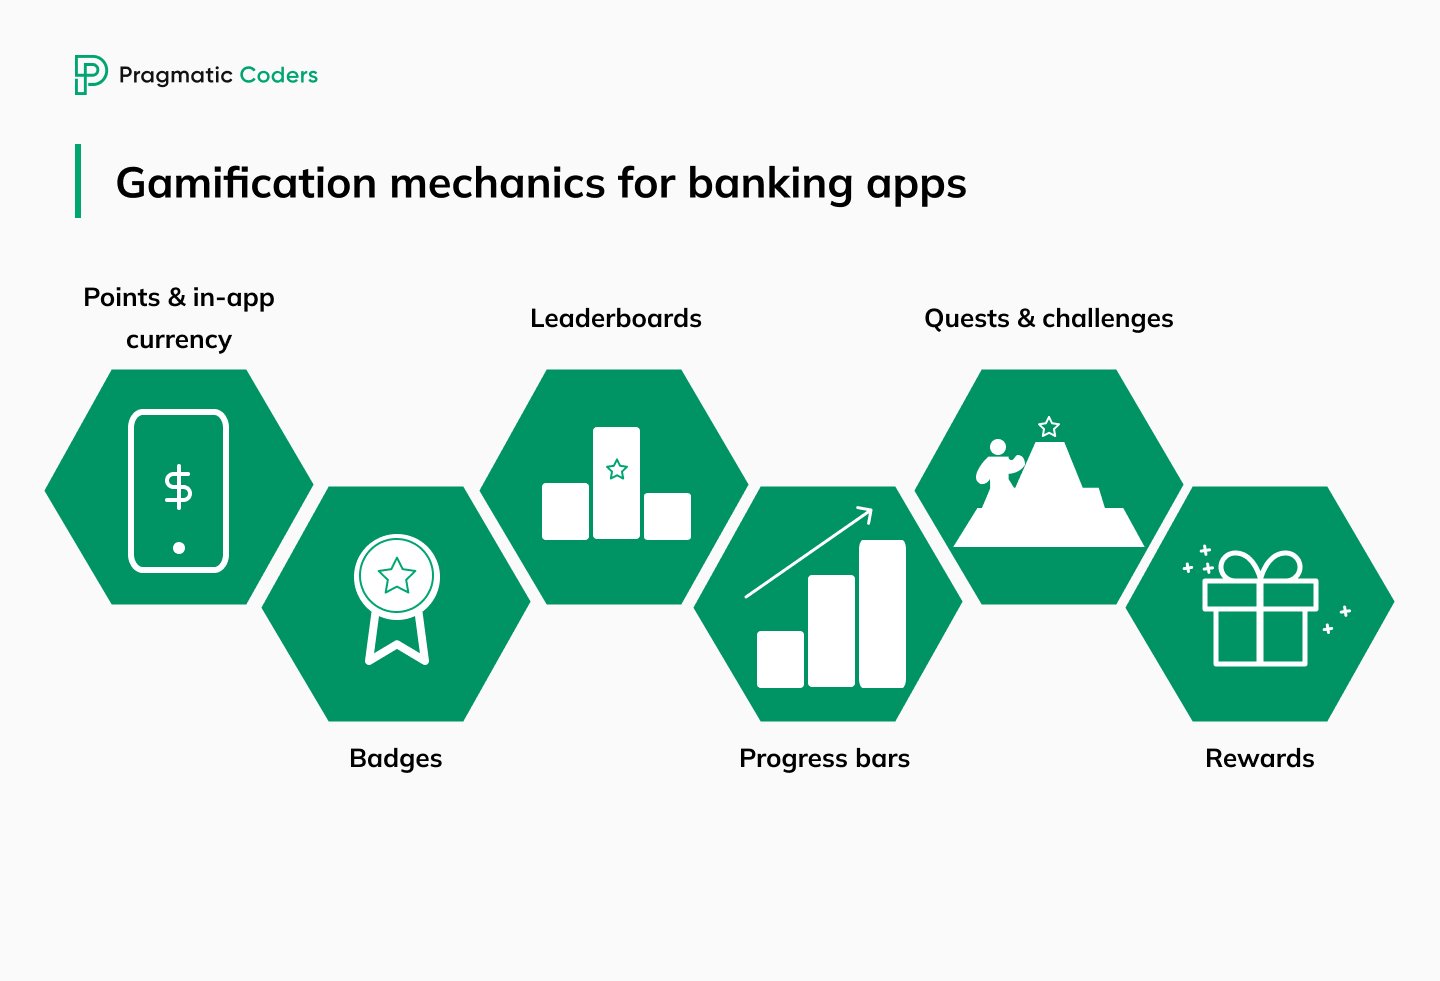 Gamification mechanics for banking apps